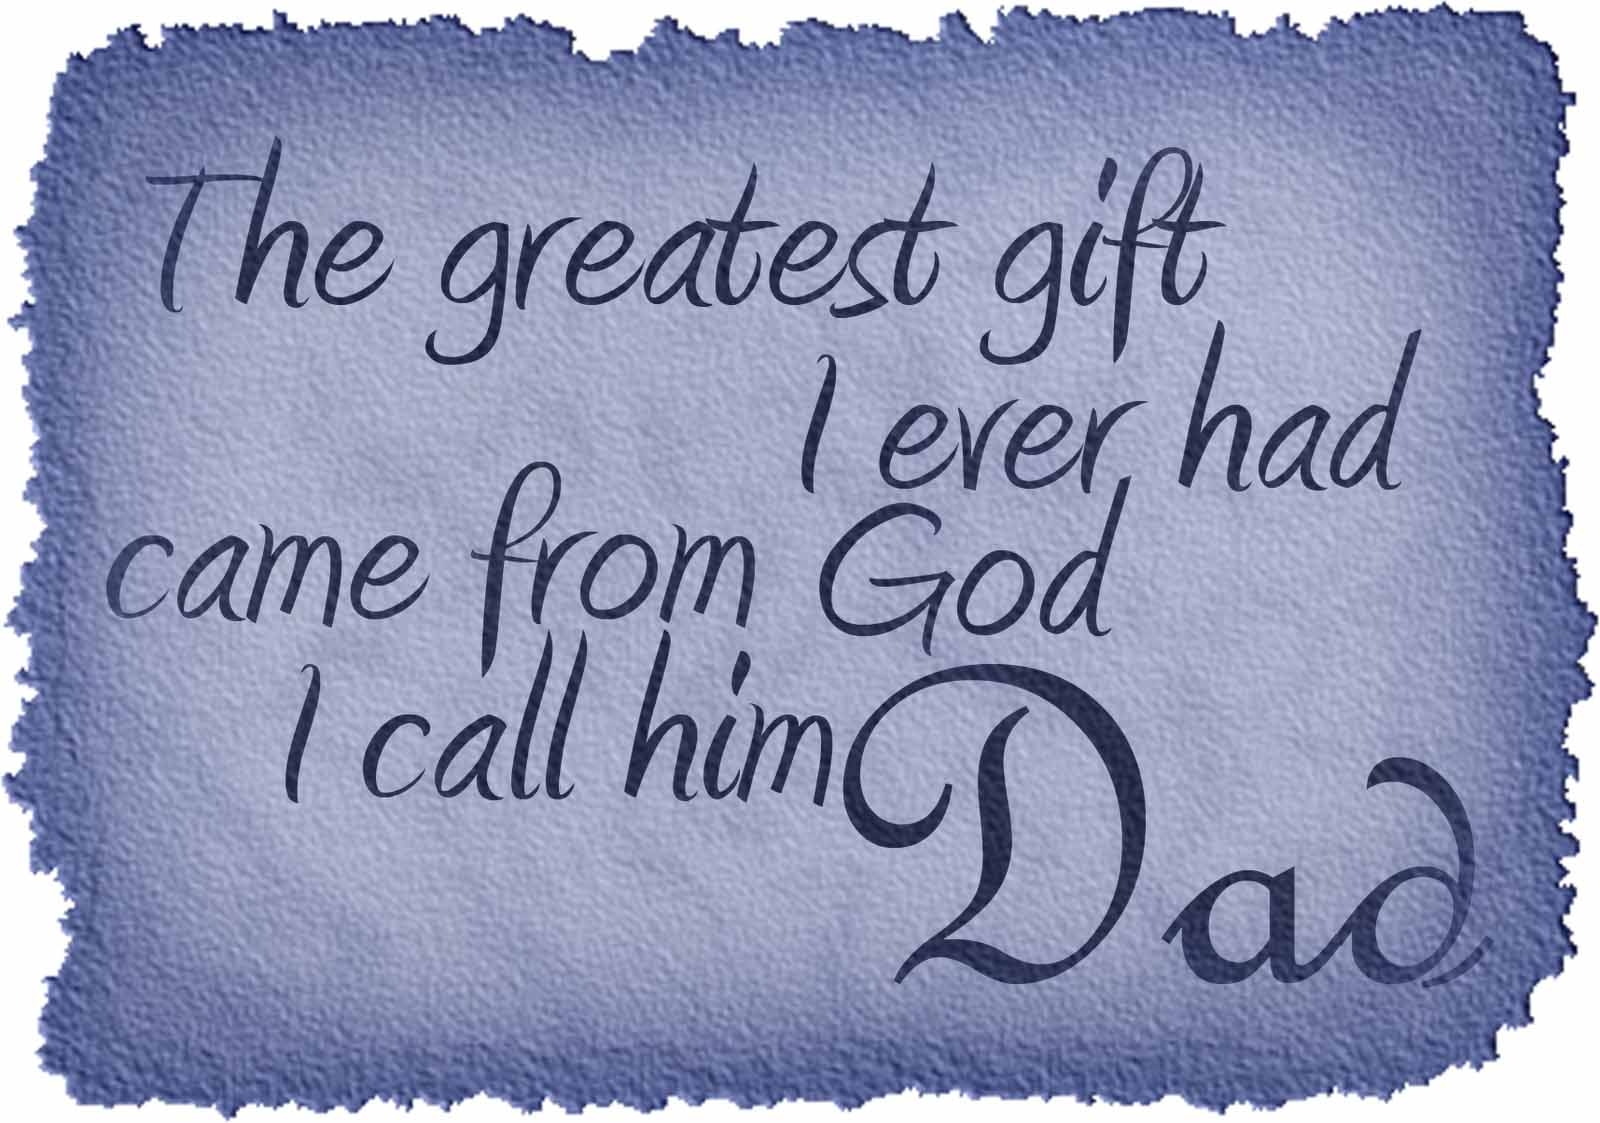 Happy Fatherampaposs Day 2015 Wishes Quote - Handwriting - HD Wallpaper 